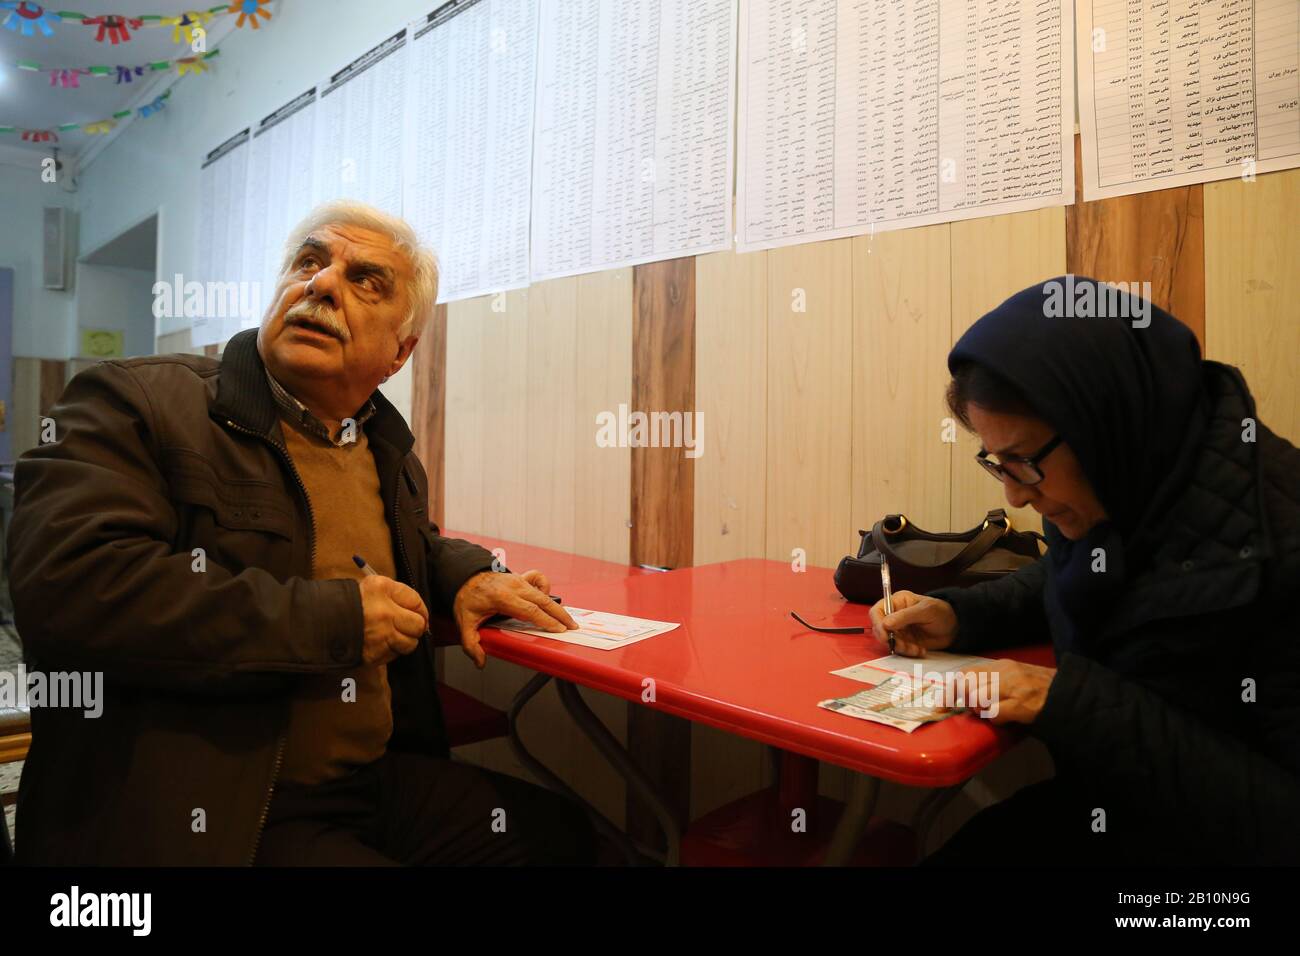 February 21, 2020: Iranians vote during parliamentary election at a polling station in downtown Tehran, Iran. Conservatives are expected to dominate the general election after an economic slump, multiple crises and the disqualification of thousands of candidates. Voters formed long lines at polling stations in south Tehran, where conservatives have a solid support base, but far fewer were seen waiting to vote in upmarket northern neighborhoods. Credit: Rouzbeh Fouladi/ZUMA Wire/Alamy Live News Stock Photo